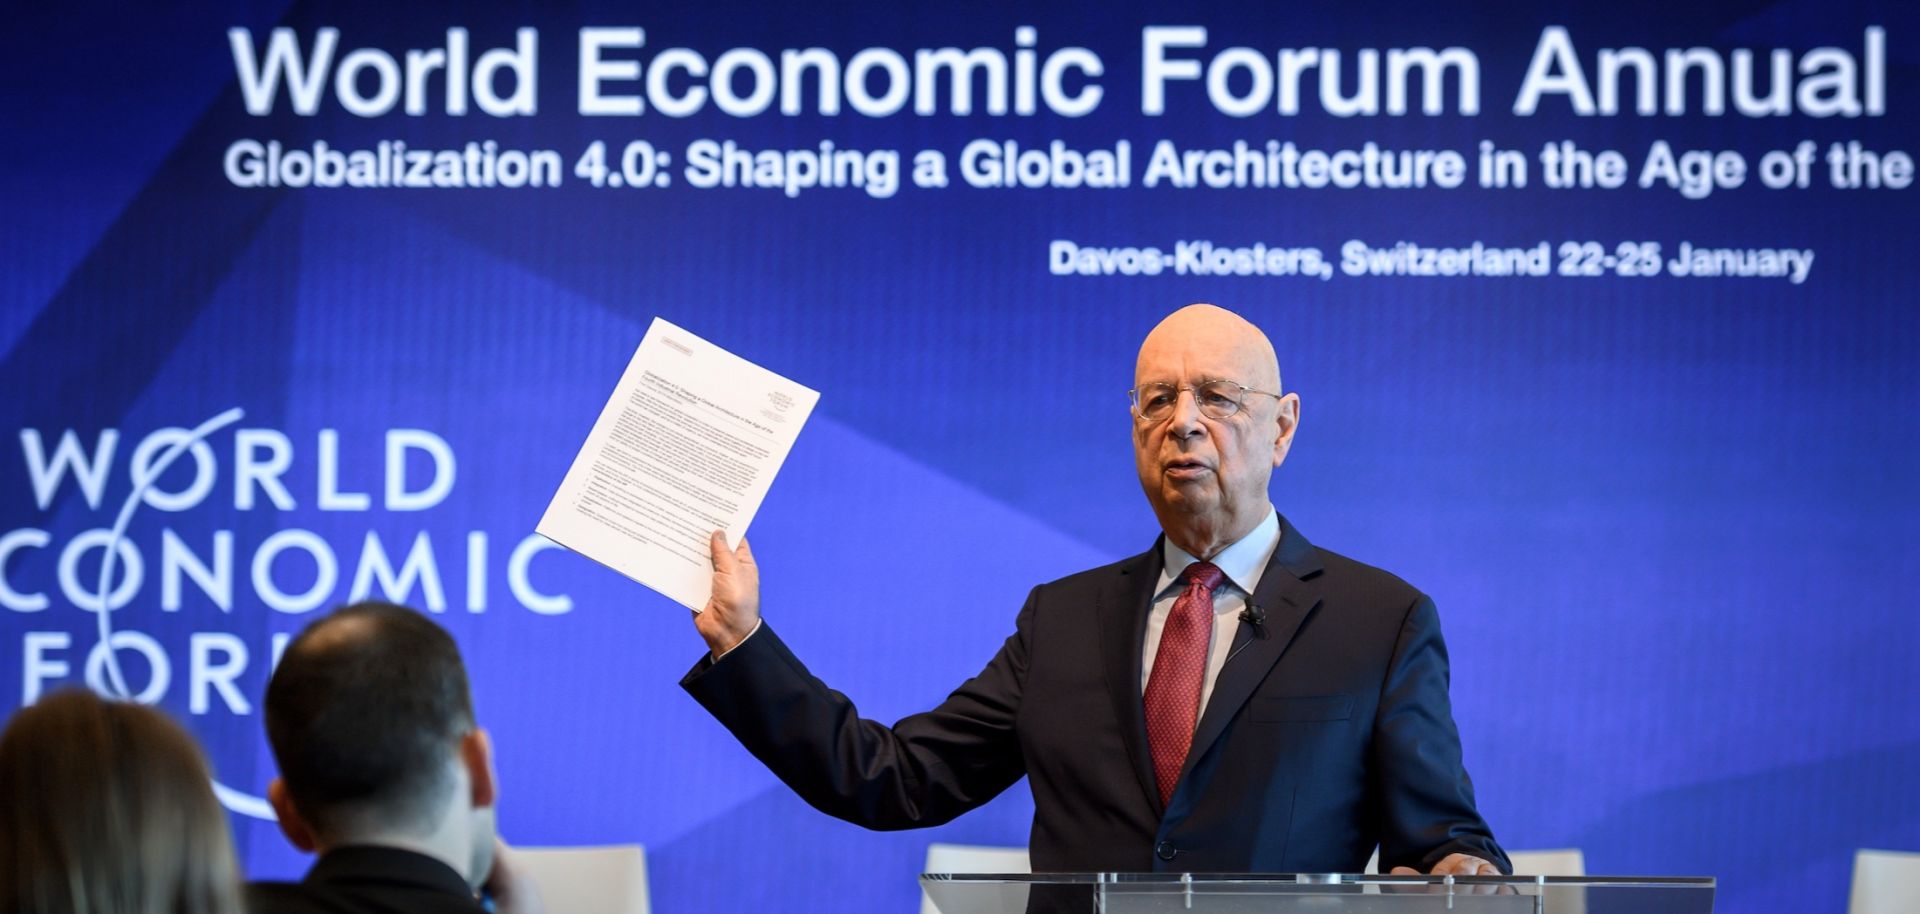 A press conference ahead of the 2019 World Economic Forum